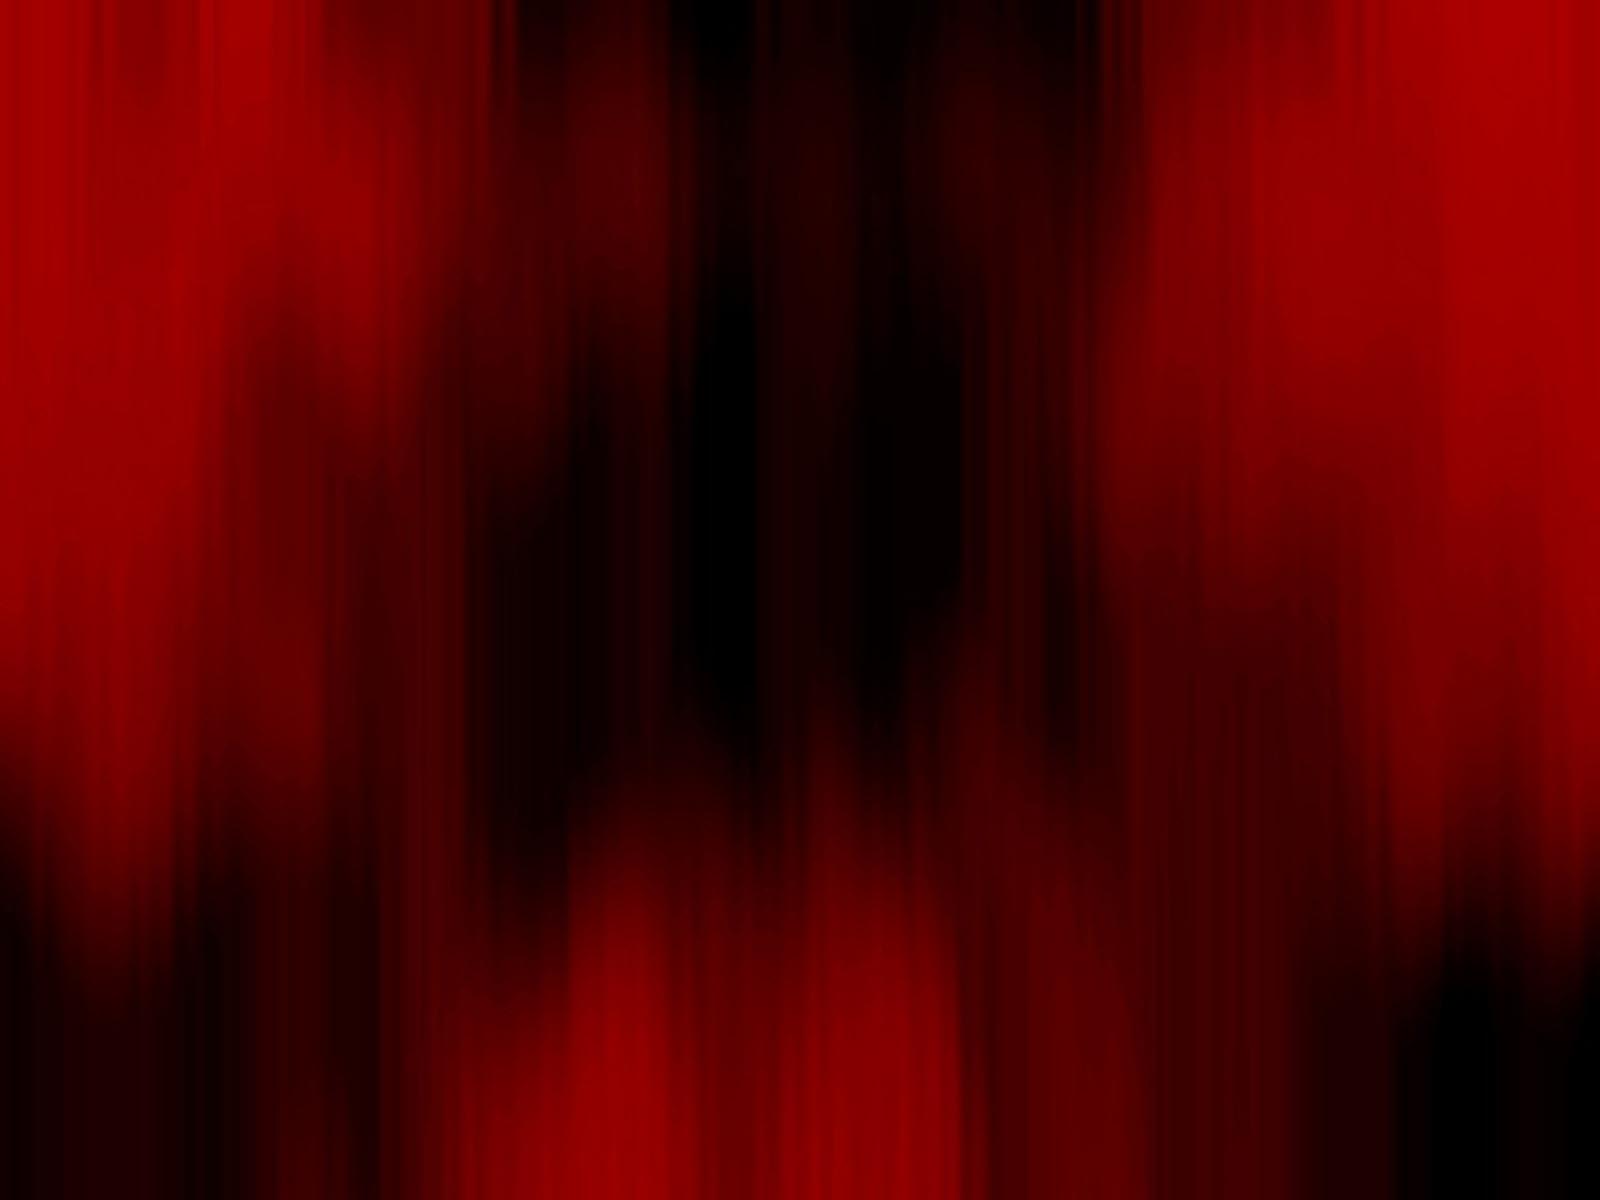 Red And Black Wallpaper Designs 26 Free Wallpaper - Love Ran Red Background - HD Wallpaper 